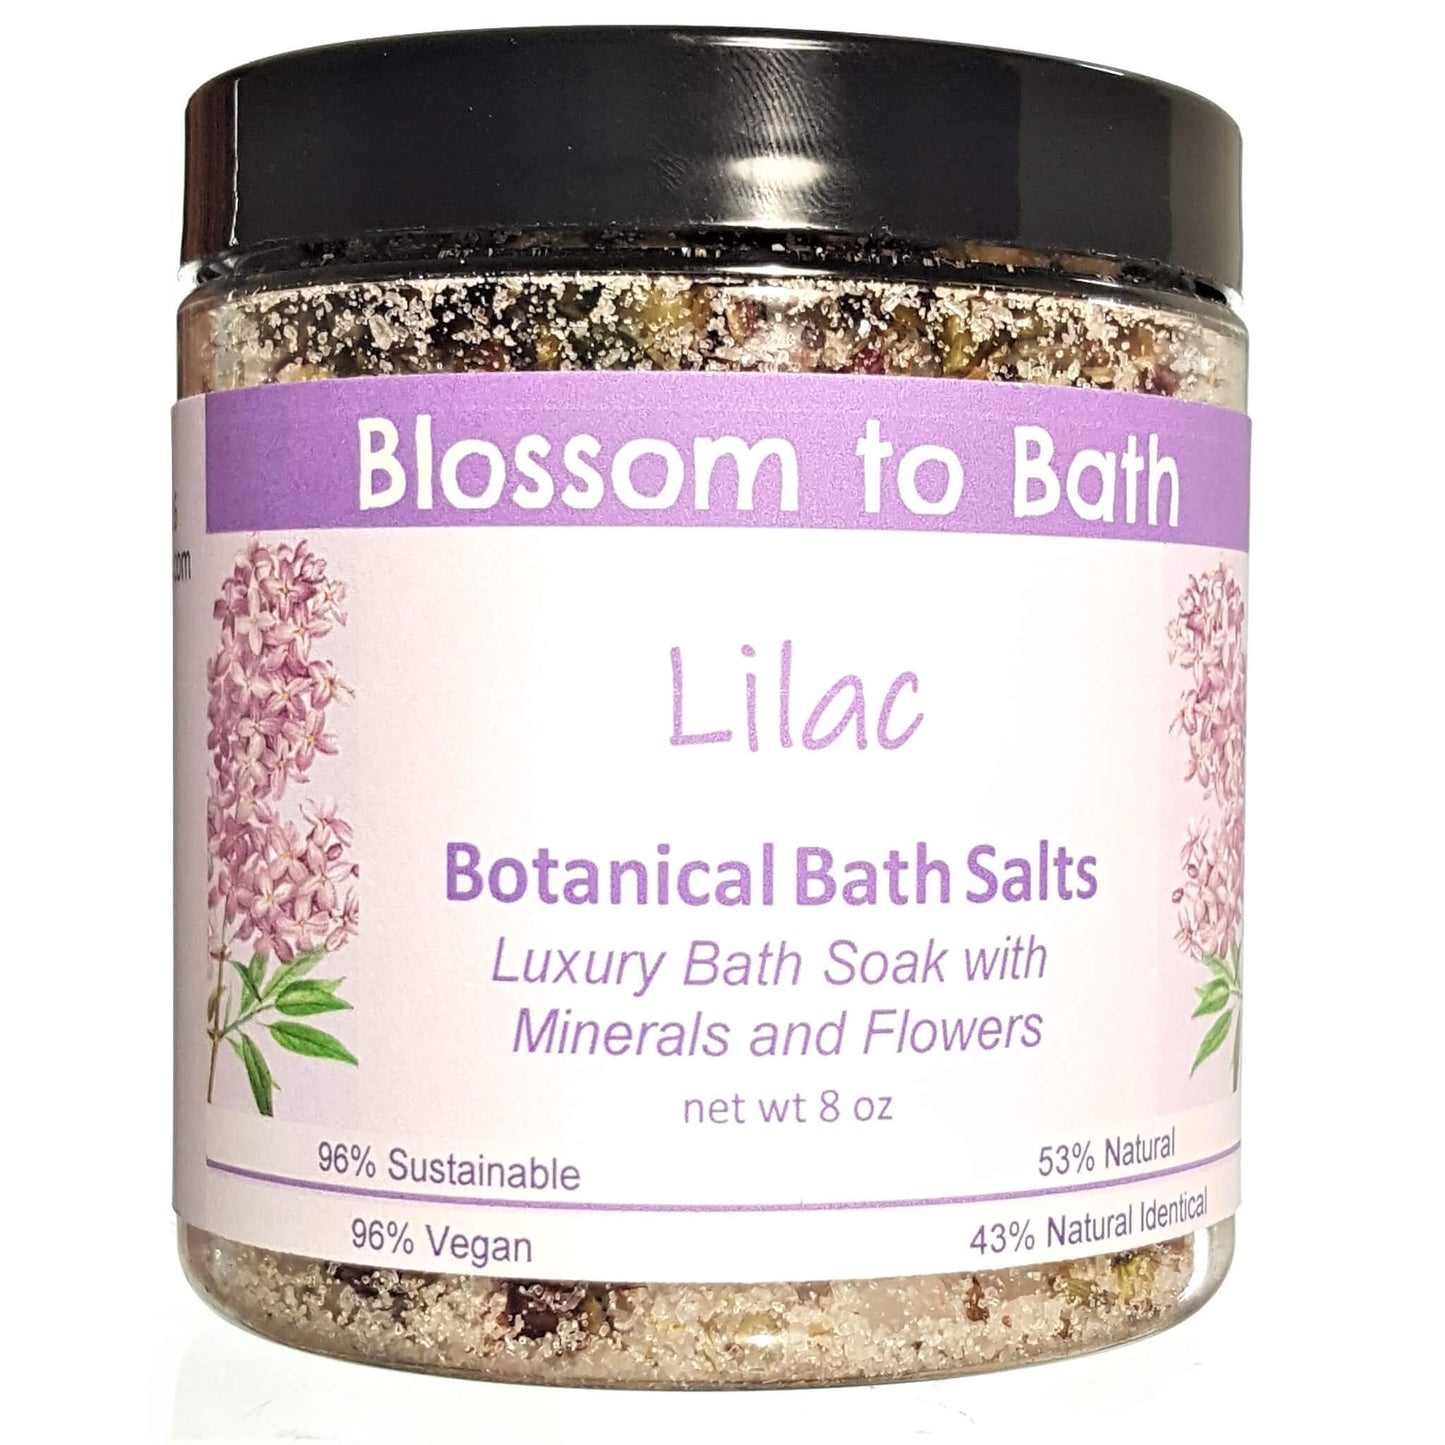 Buy Blossom to Bath Lilac Botanical Bath Salts from Flowersong Soap Studio.  A hand selected variety of skin loving botanicals and mineral rich salts for a unique, luxurious soaking experience  The scent of a freshly blooming lilac bush, the embodiment of spring flowers.